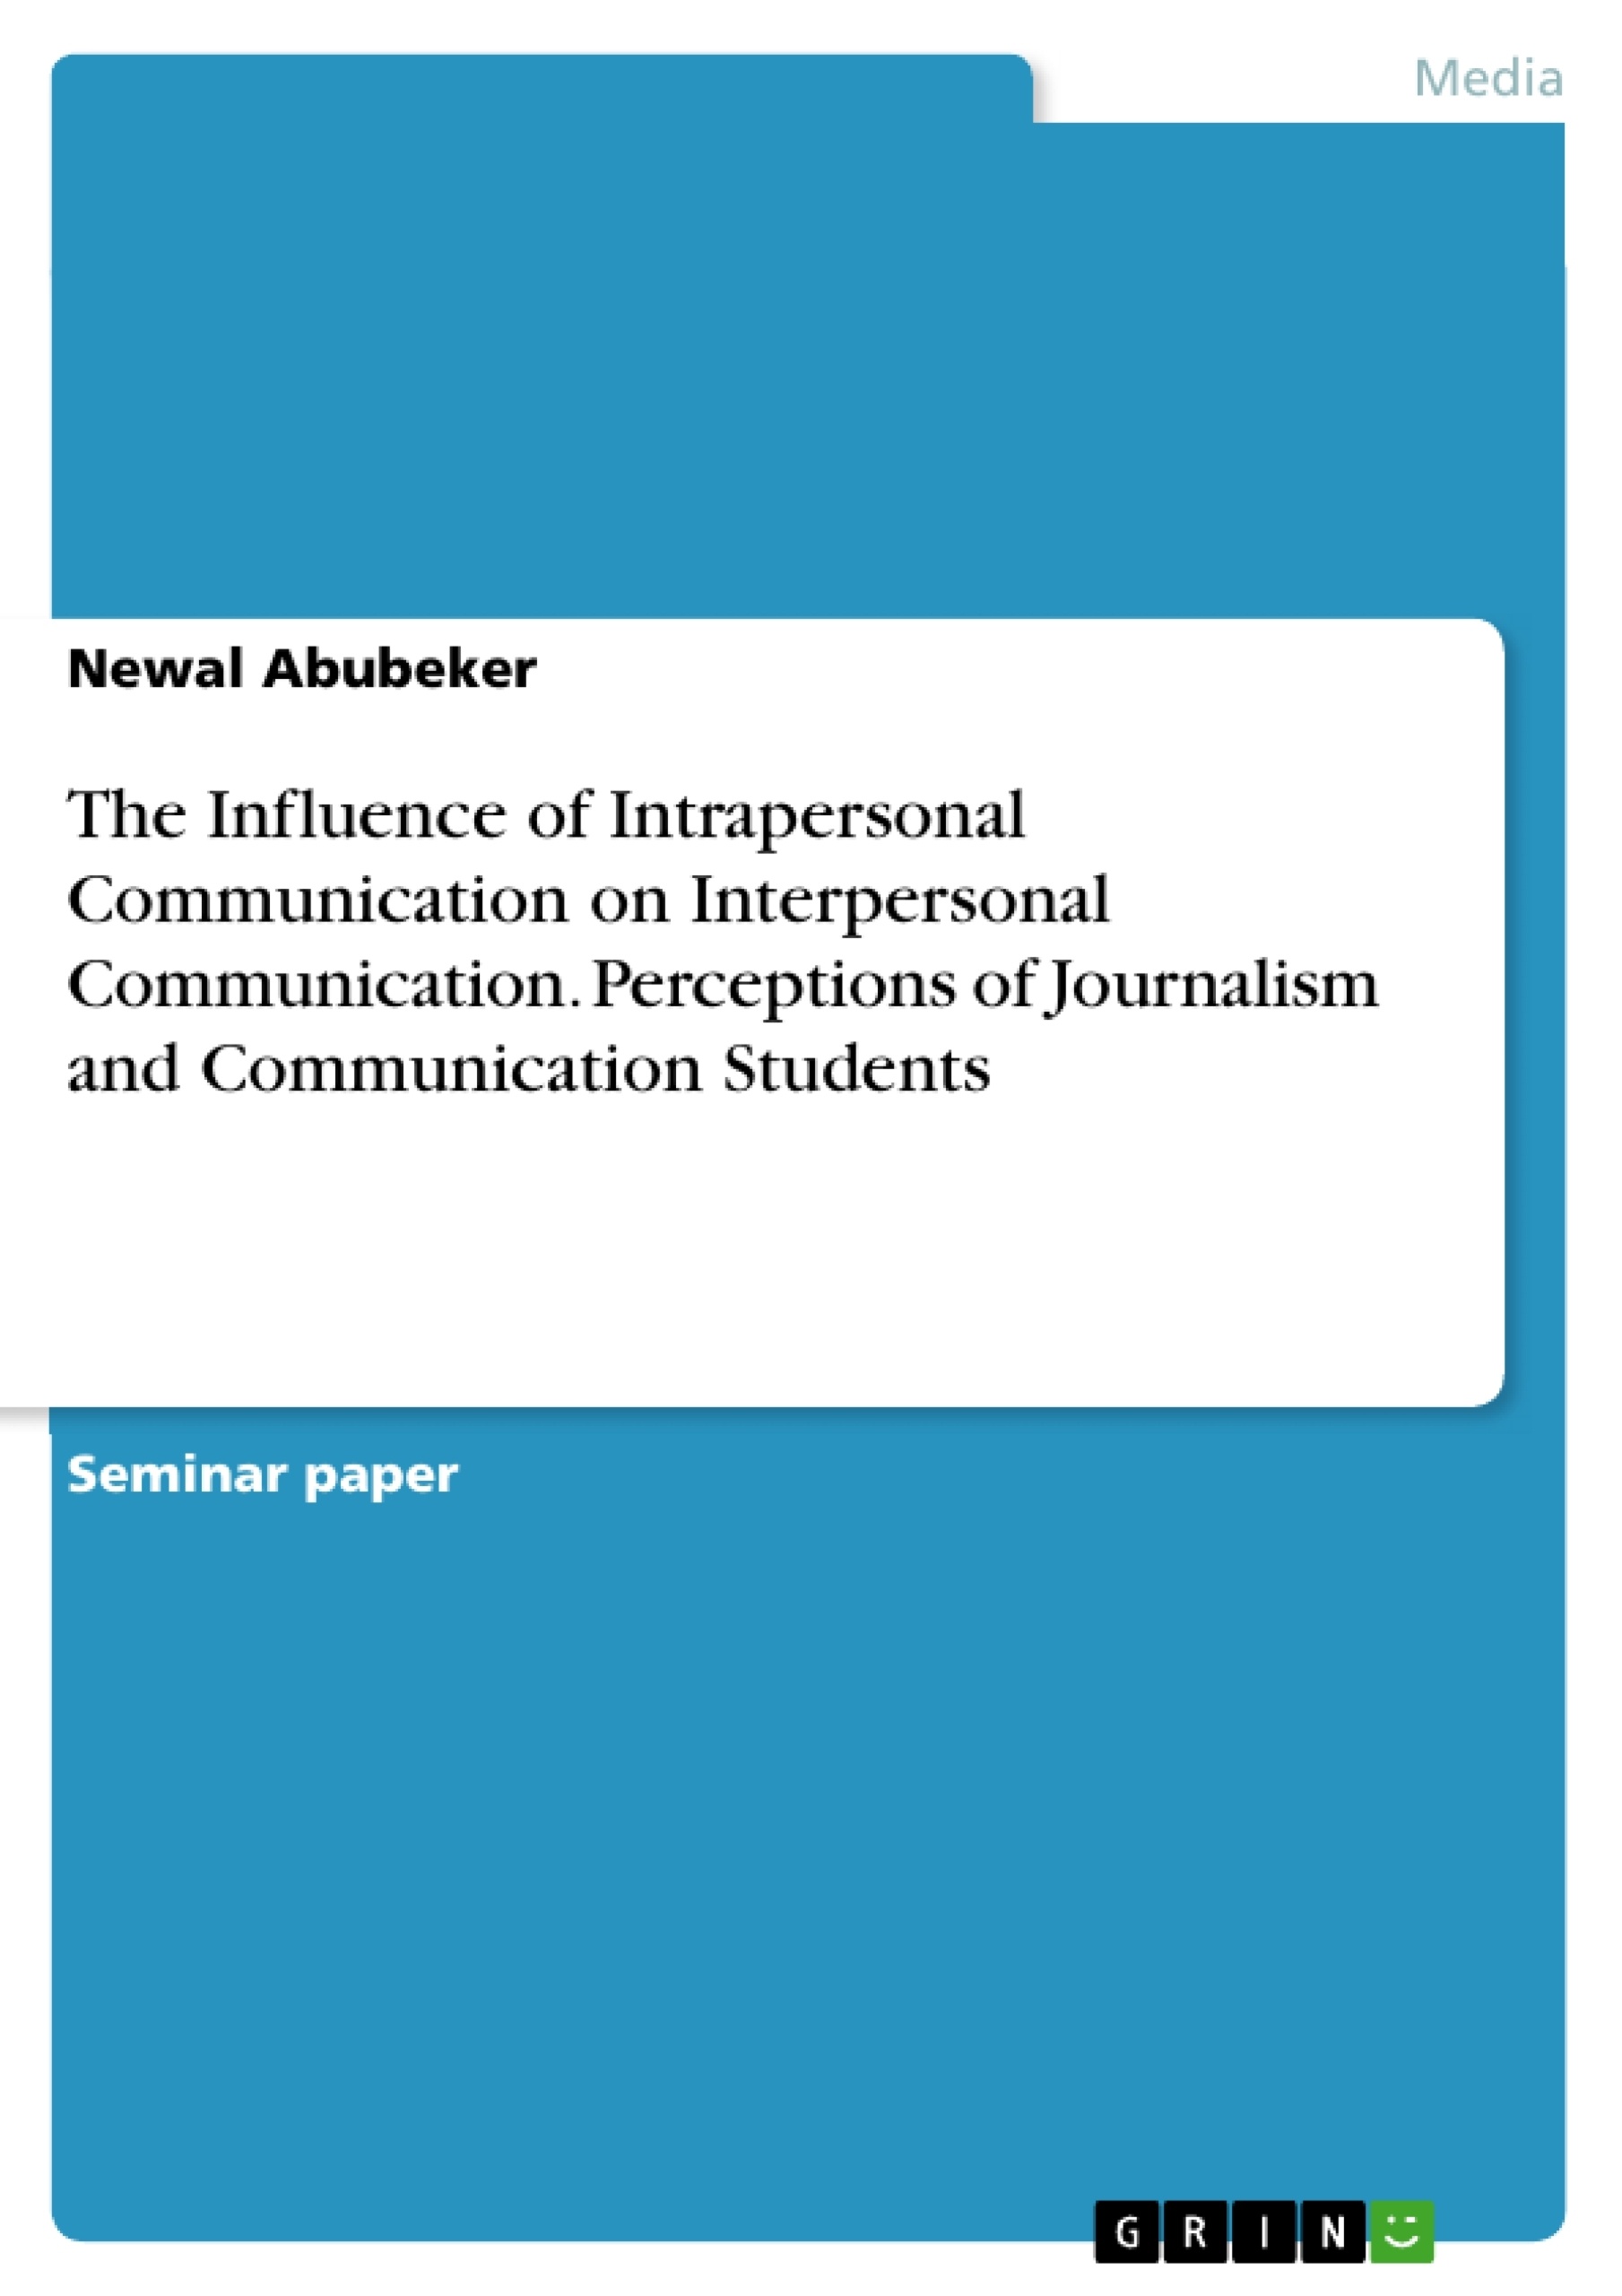 Intrapersonal communication definition examples